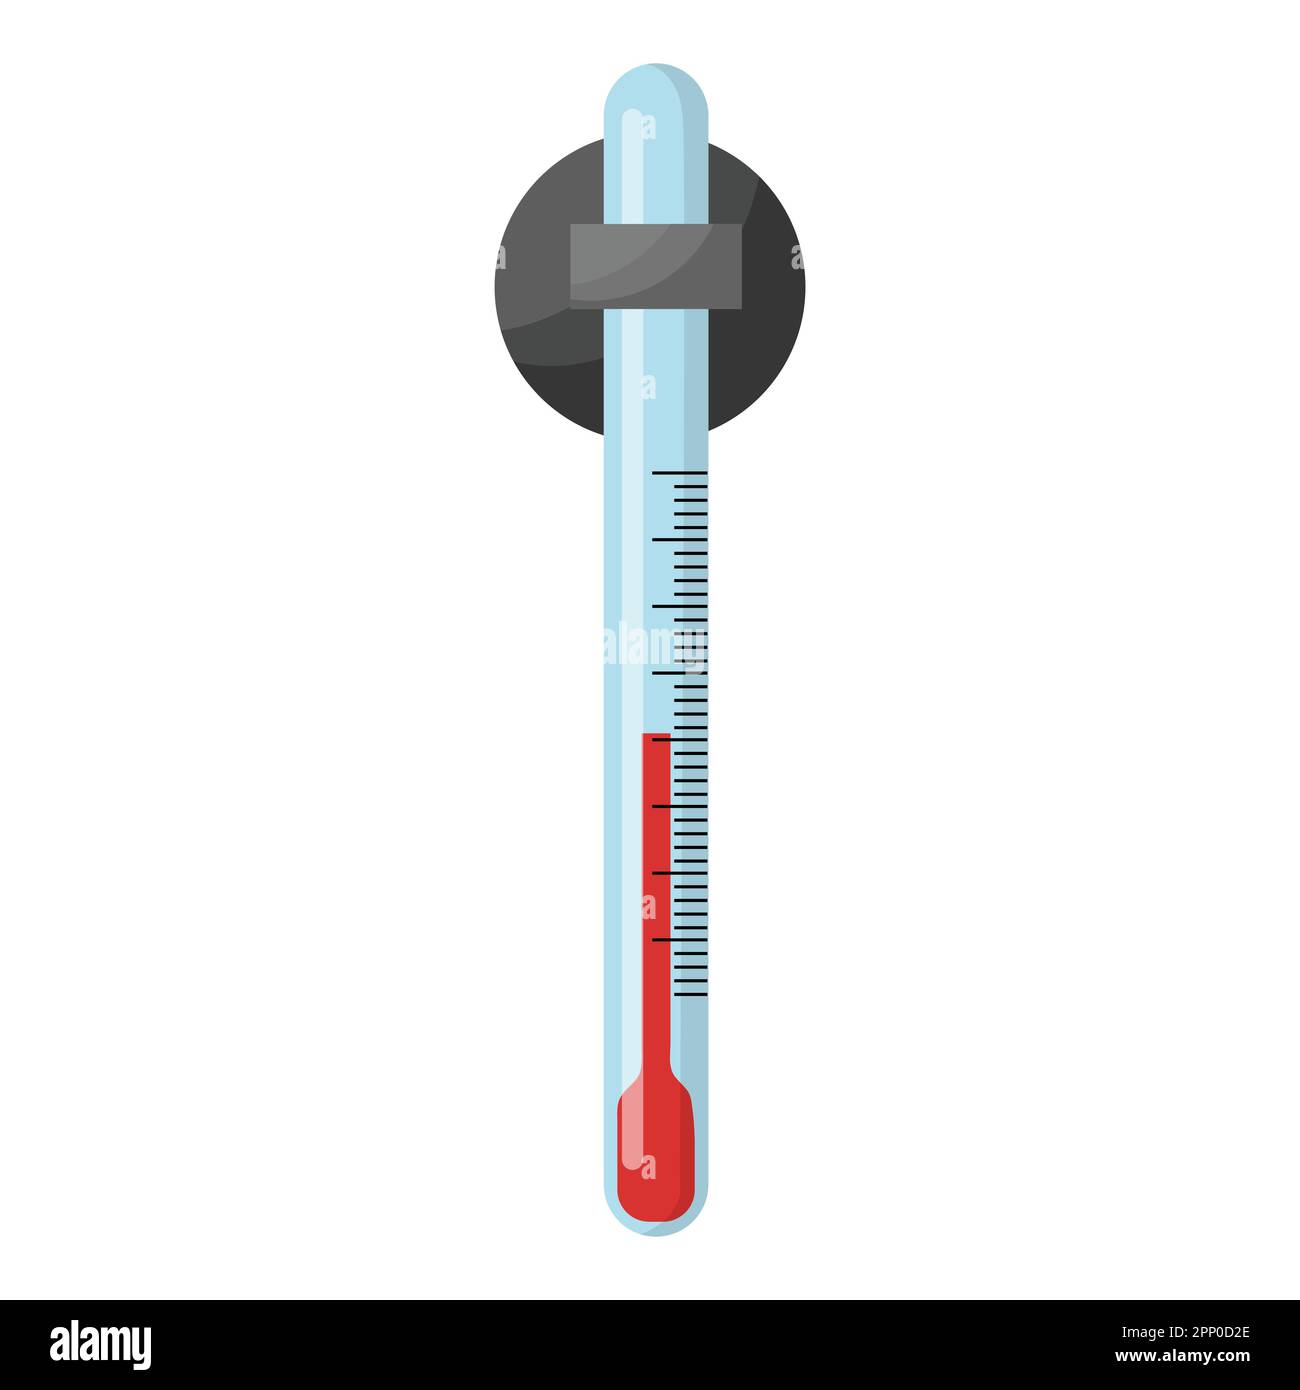 https://c8.alamy.com/comp/2PP0D2E/thermometer-for-measuring-temperature-thermometer-for-aquarium-vector-isolated-on-a-white-background-2PP0D2E.jpg